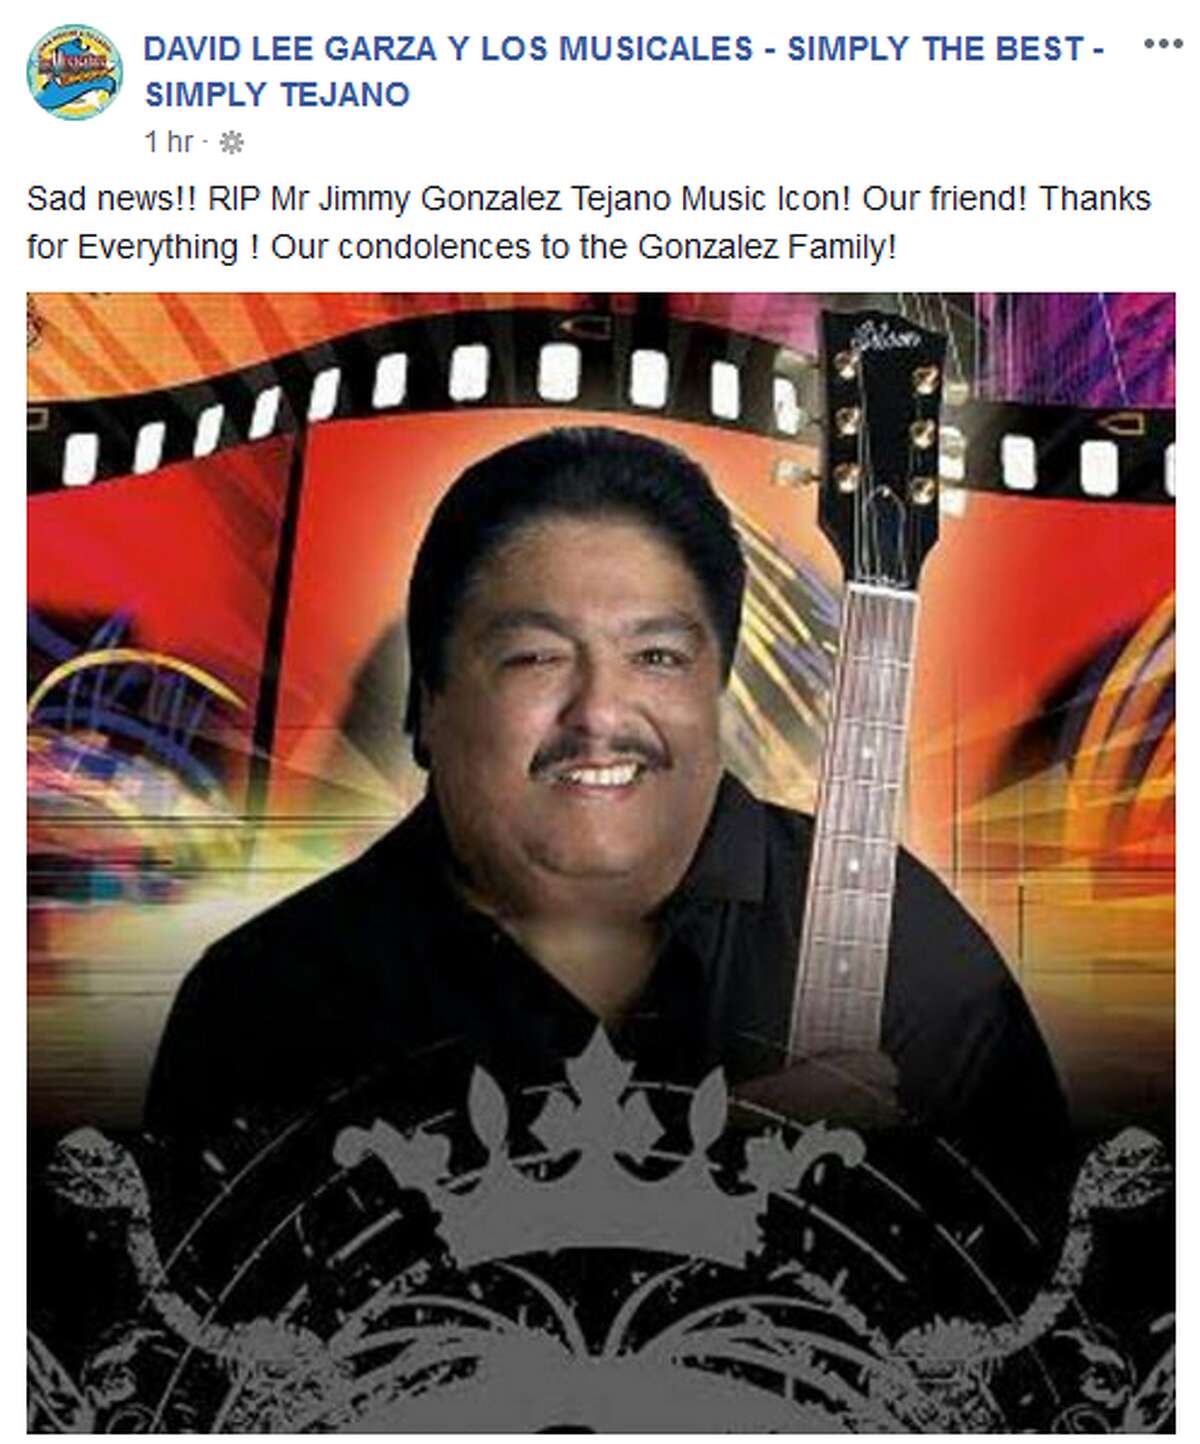 David Lee Garza y Los Musicales: Sad news!! RIP Mr Jimmy Gonzalez Tejano Music Icon! Our friend! Thanks for Everything ! Our condolences to the Gonzalez Family!